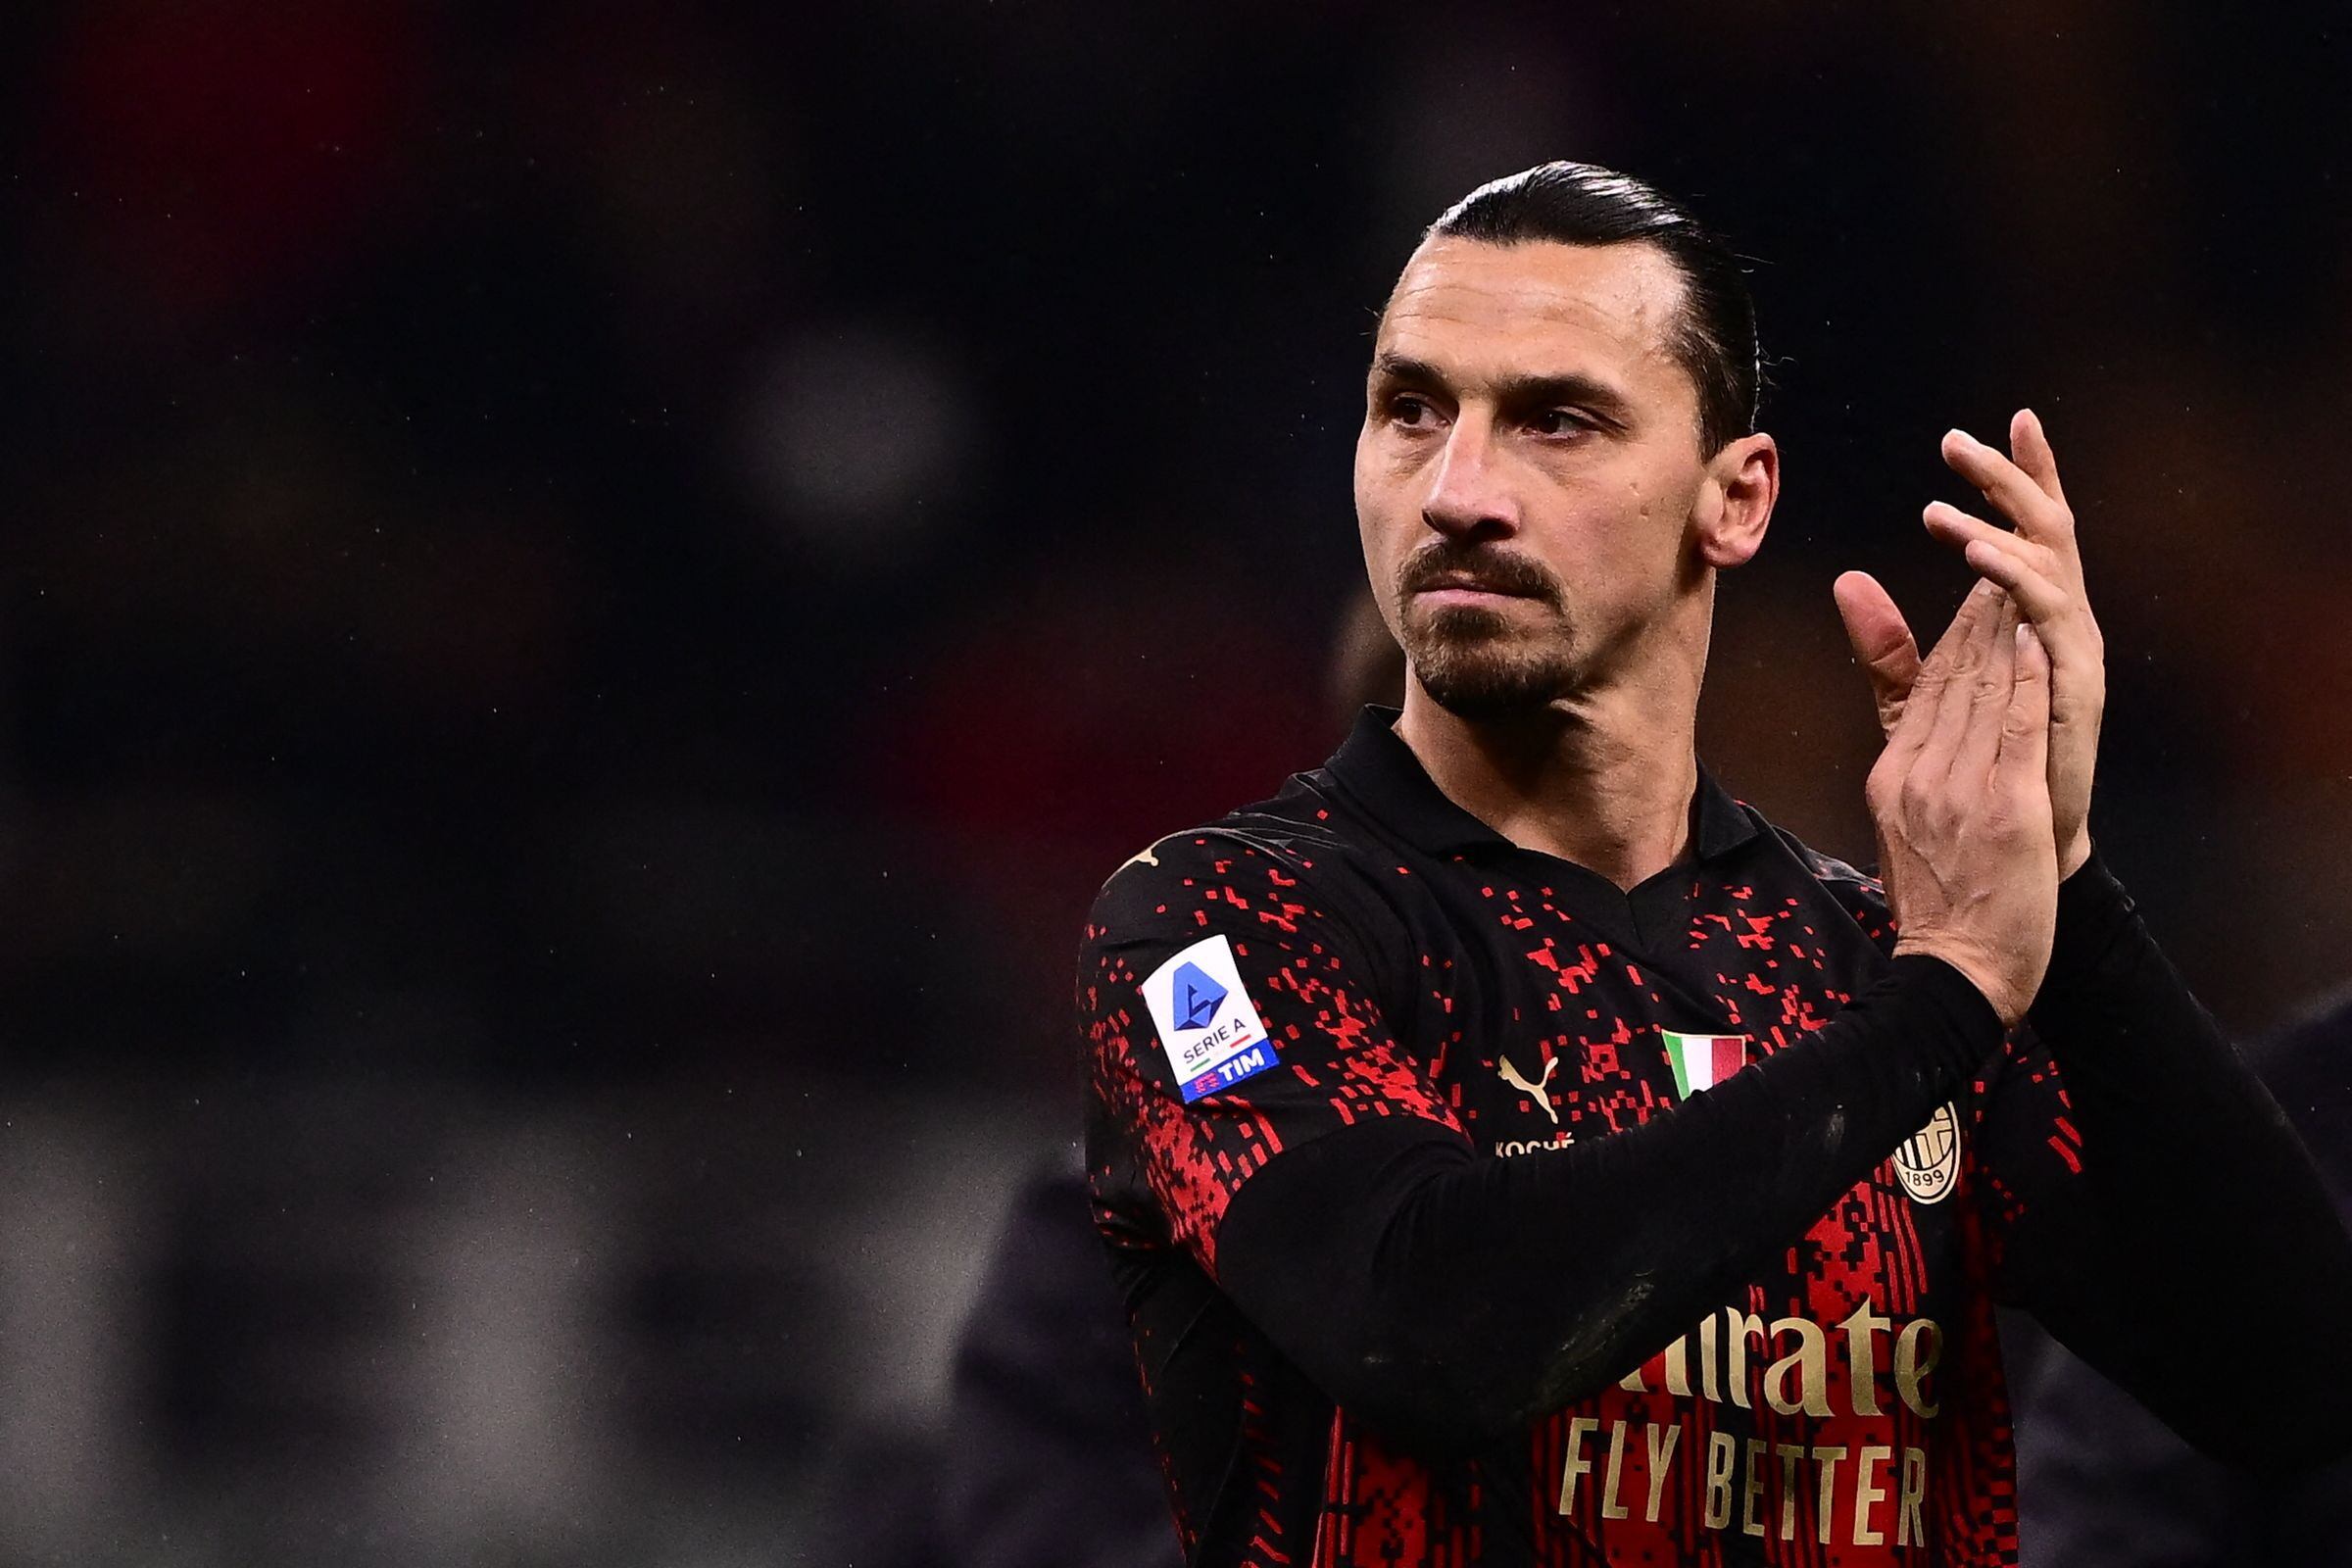 (FILES) AC Milan's Swedish forward Zlatan Ibrahimovic acknowledges the public at the end of the Italian Serie A football match between AC Milan and Atalanta at the San Siro stadium in Milan on February 26, 2023. - Zlatan Ibrahimovic's injury-hit season could be at an end after AC Milan said on April 29, 2023 that the Sweden international has picked up a knock to his right calf adding that there was a "small hope" that he could play before the end of the season, which finishes on the first weekend in June.. (Photo by Marco BERTORELLO / AFP)